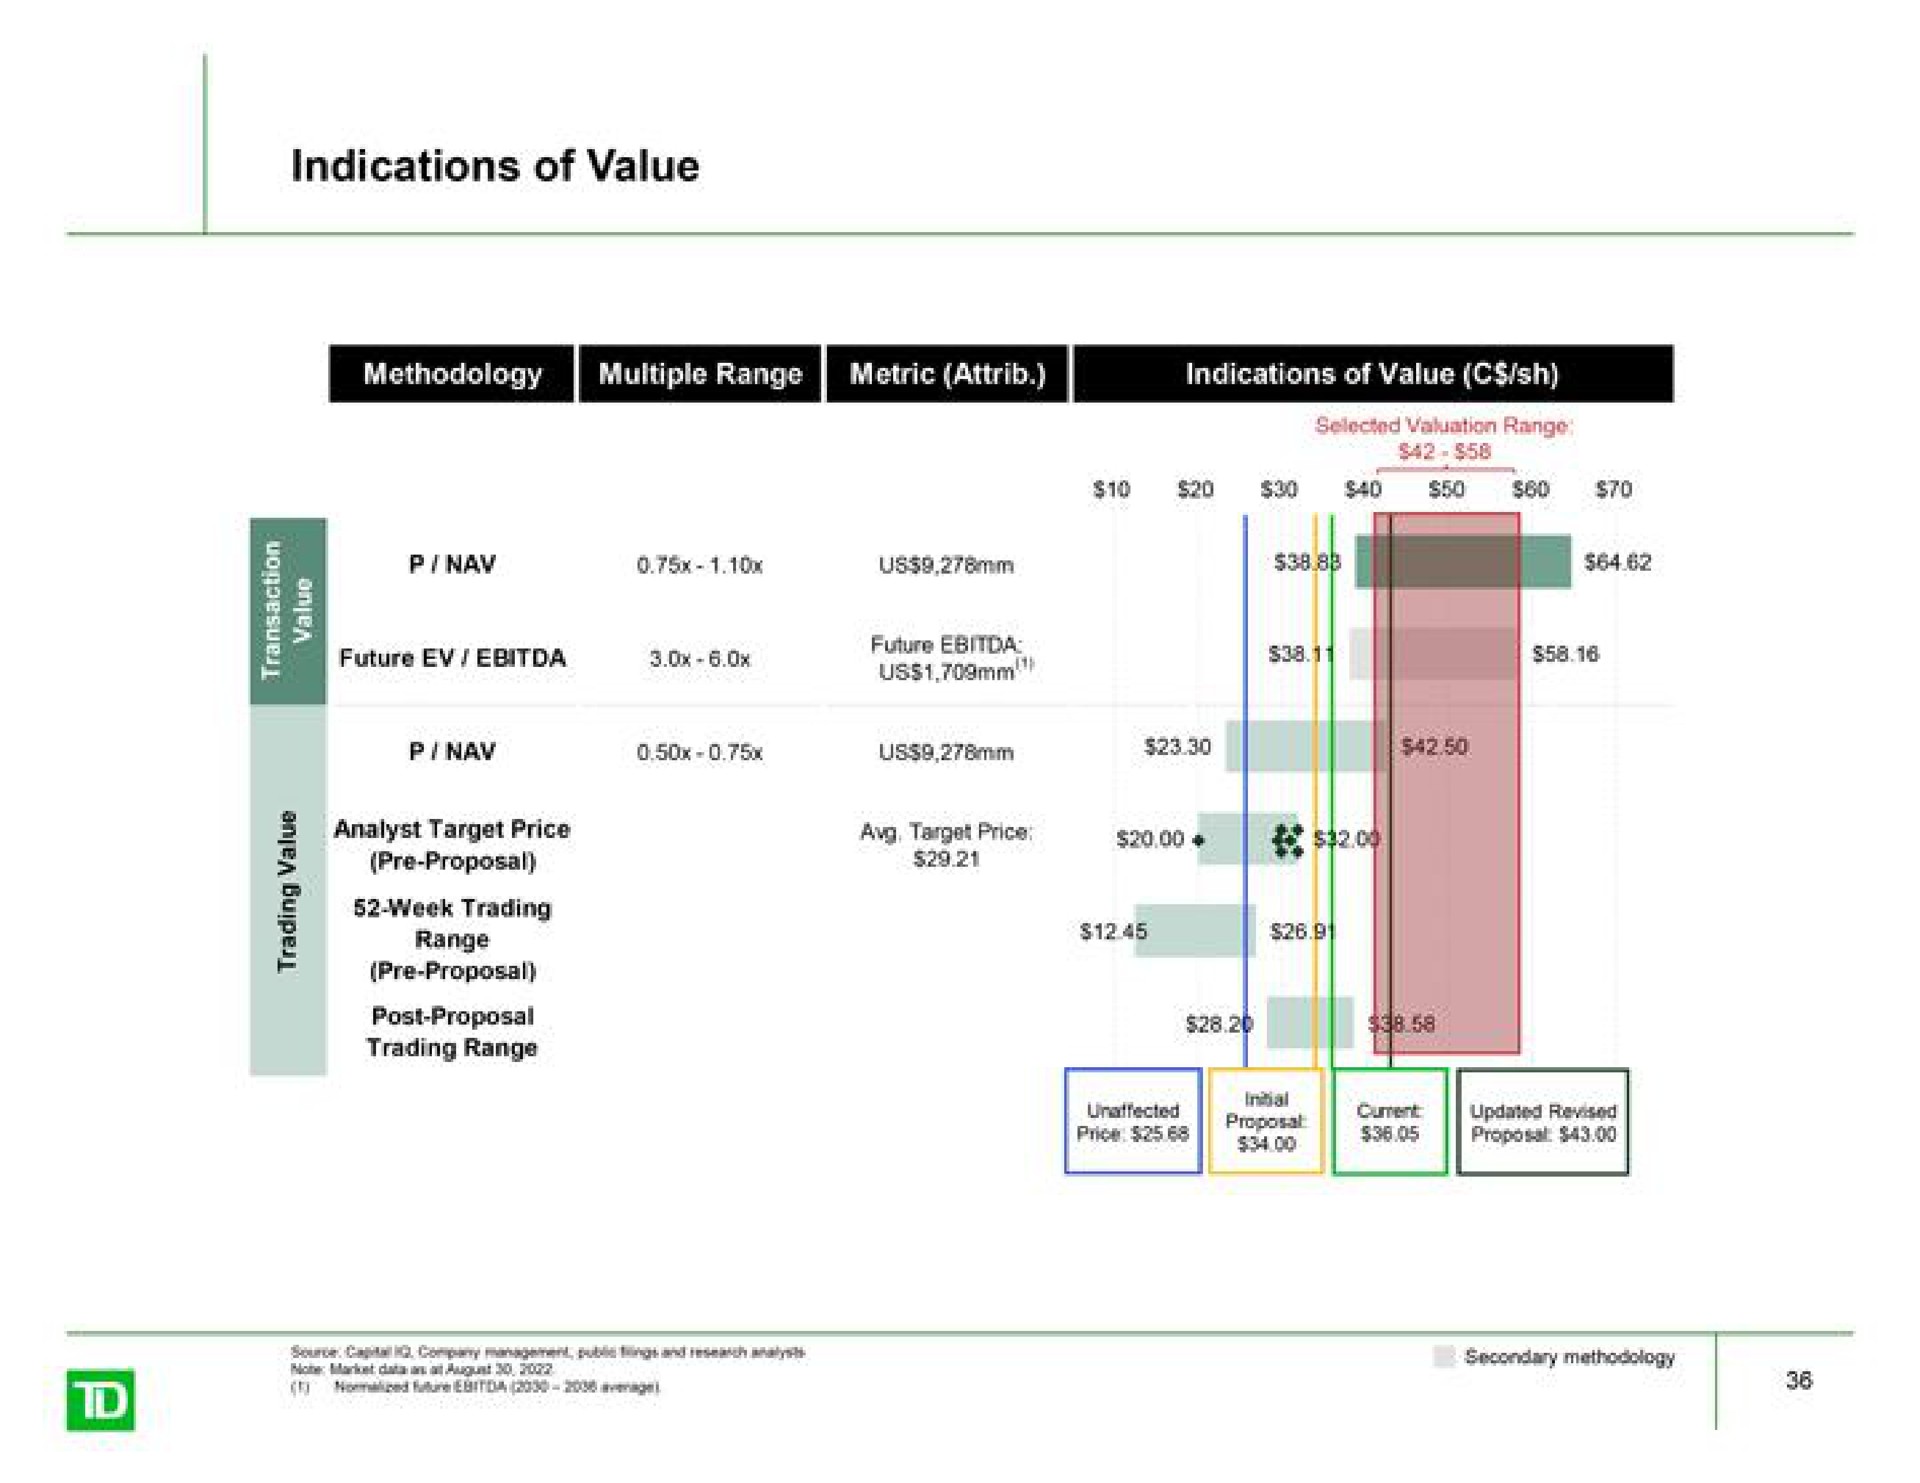 indications of value | TD Securities